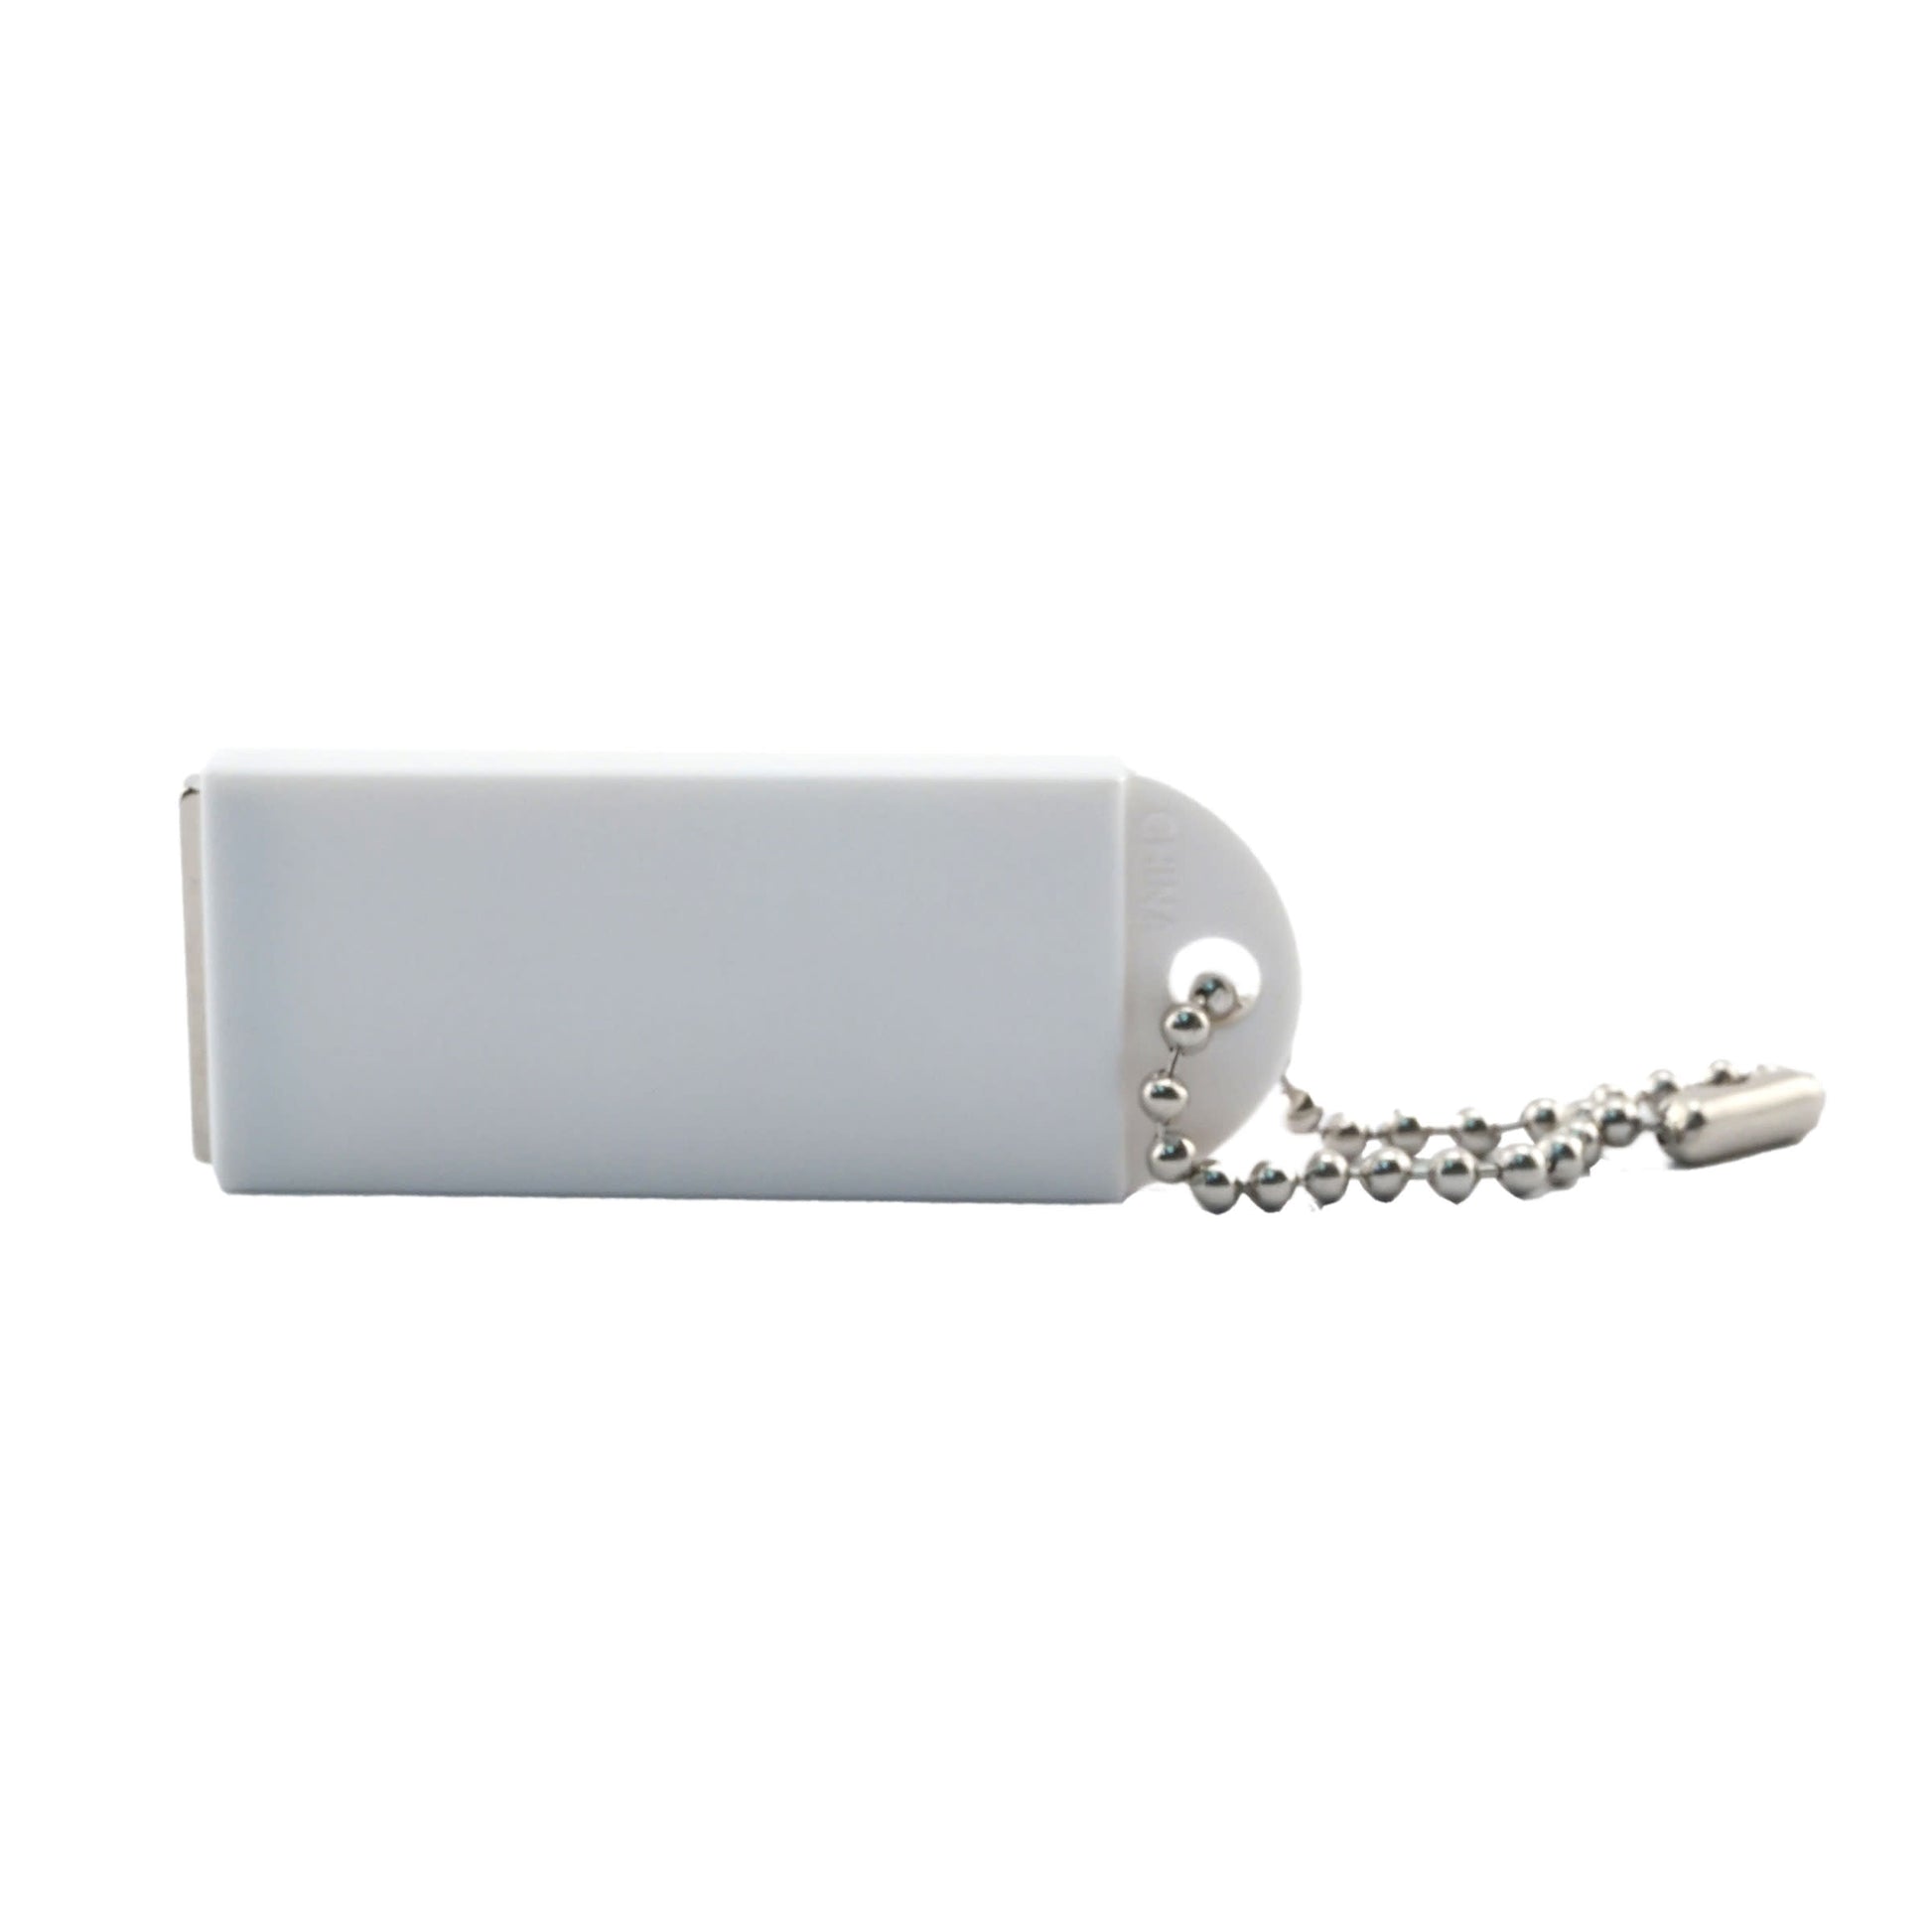 Load image into Gallery viewer, 07604 Neodymium Key Chain Magnet with Logo, White - 